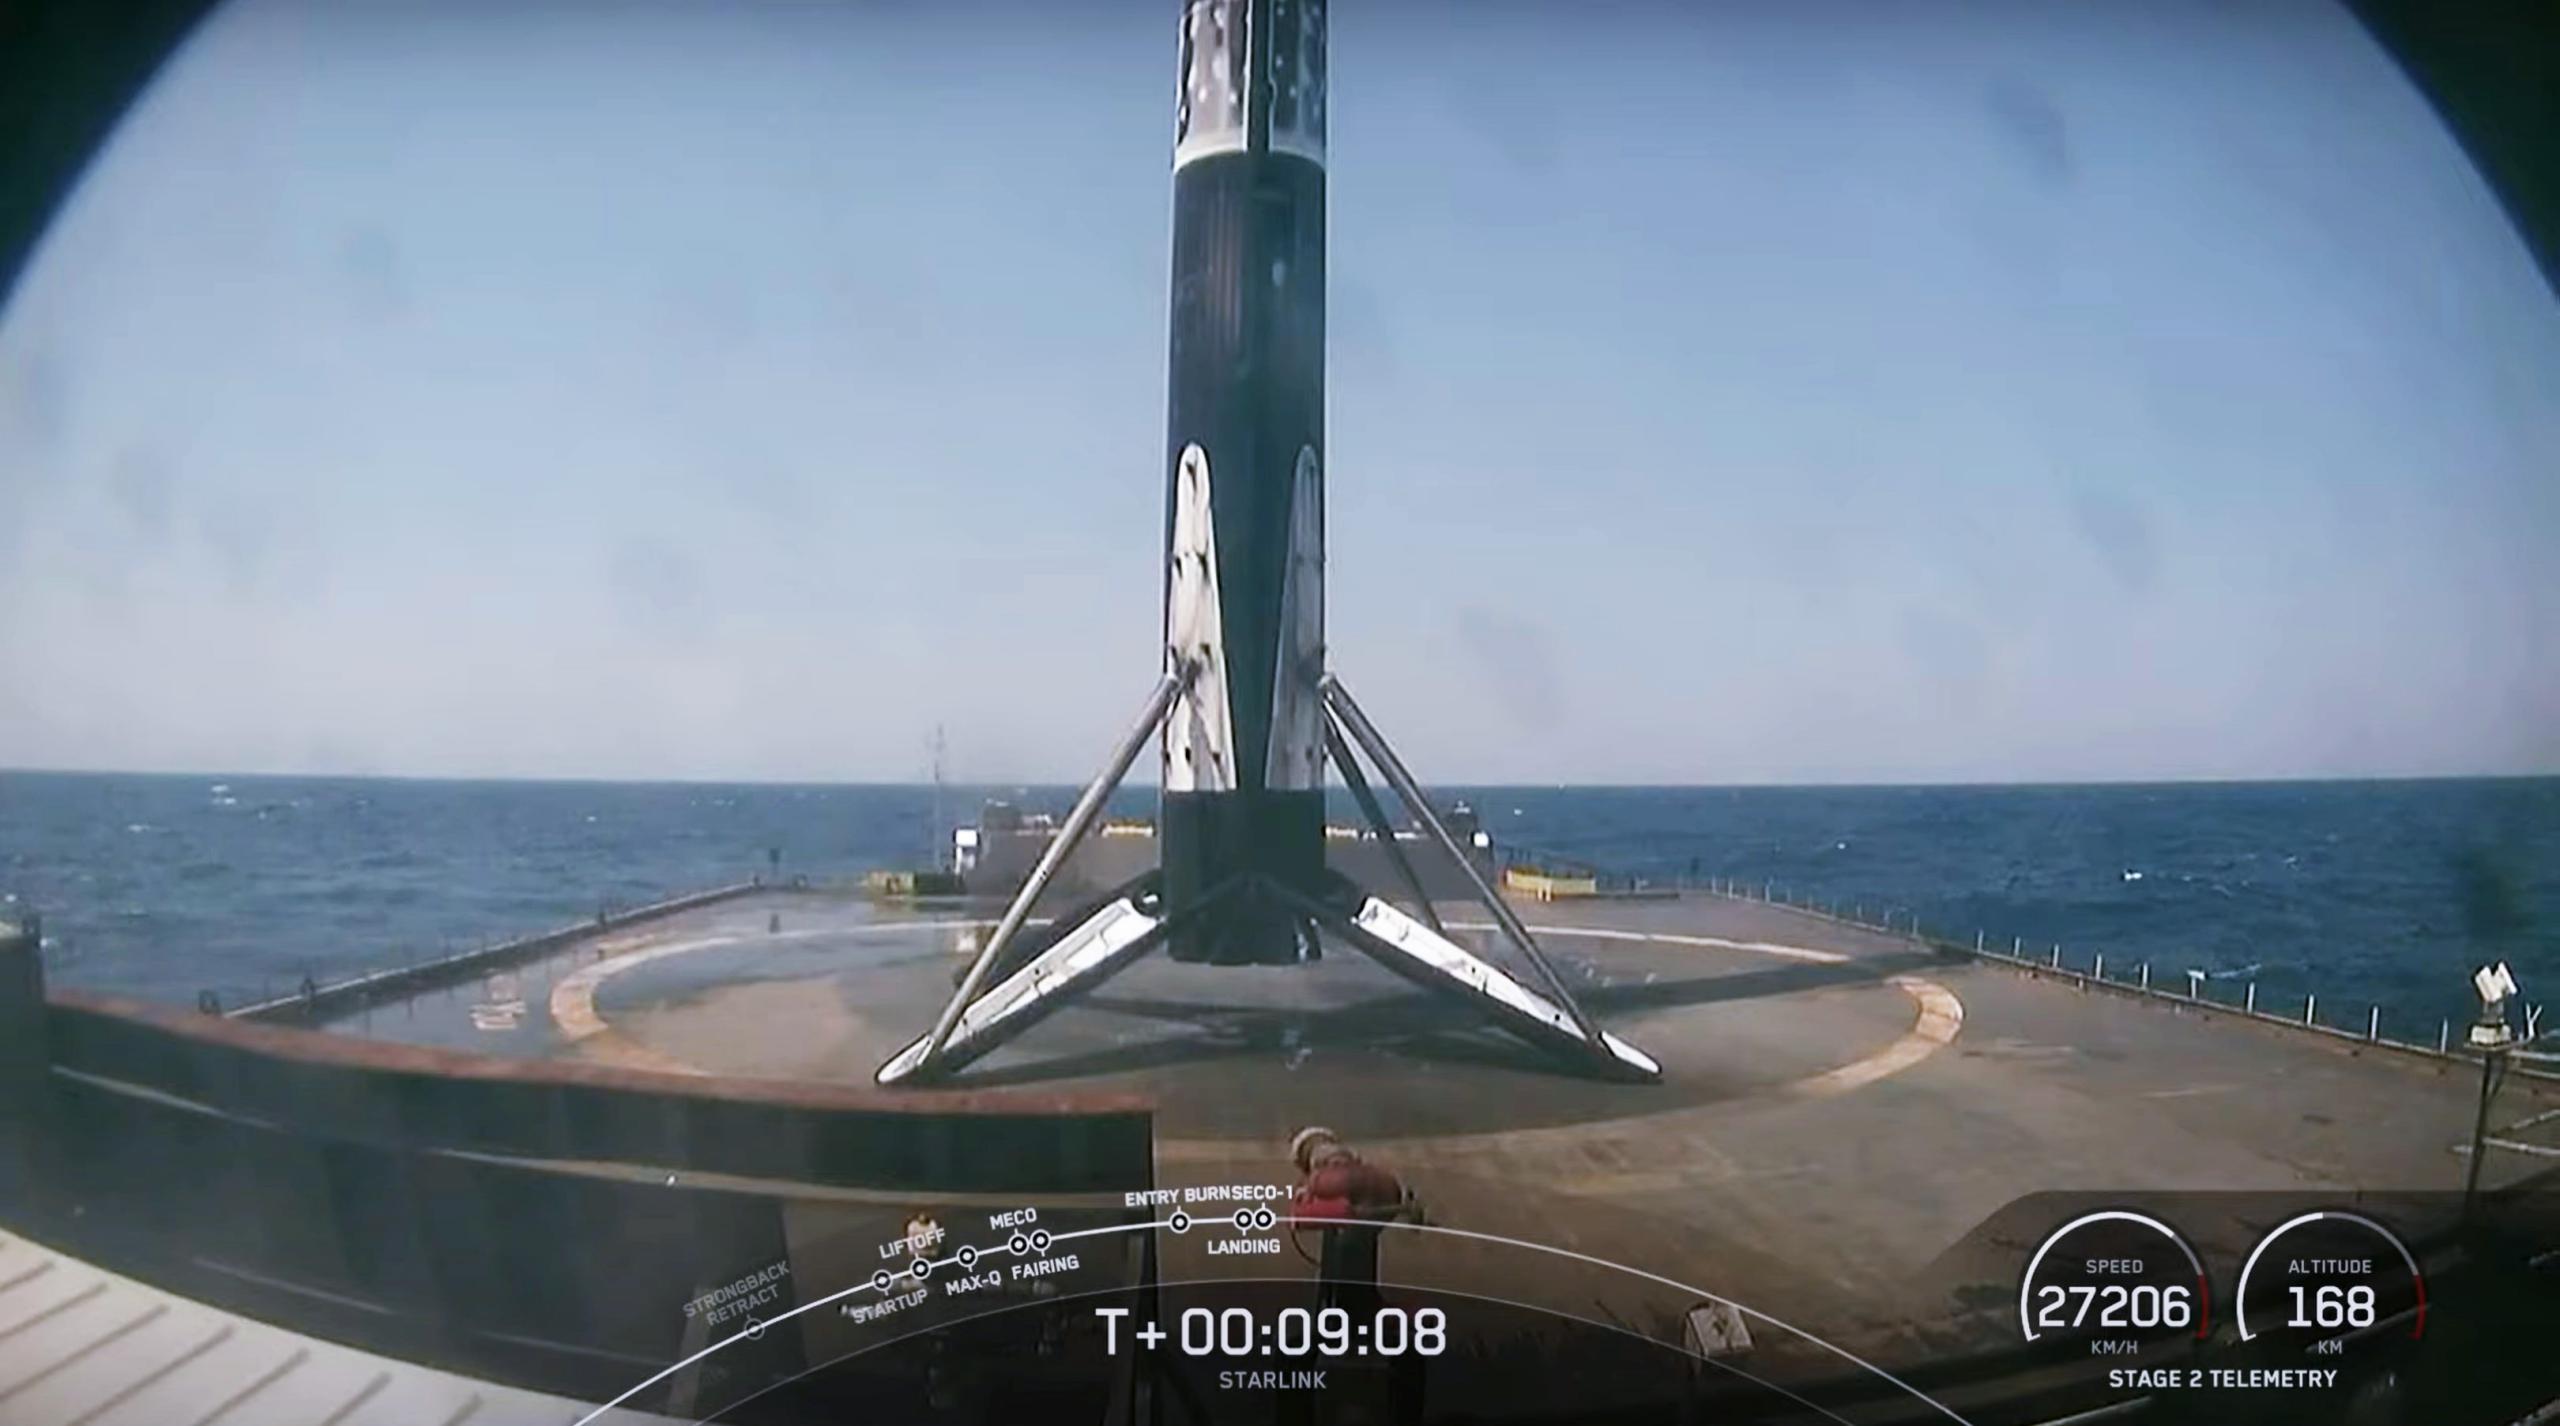 Starlink-23 Falcon 9 B1058 LC-40 040721 webcast (SpaceX) landing 3 (c)